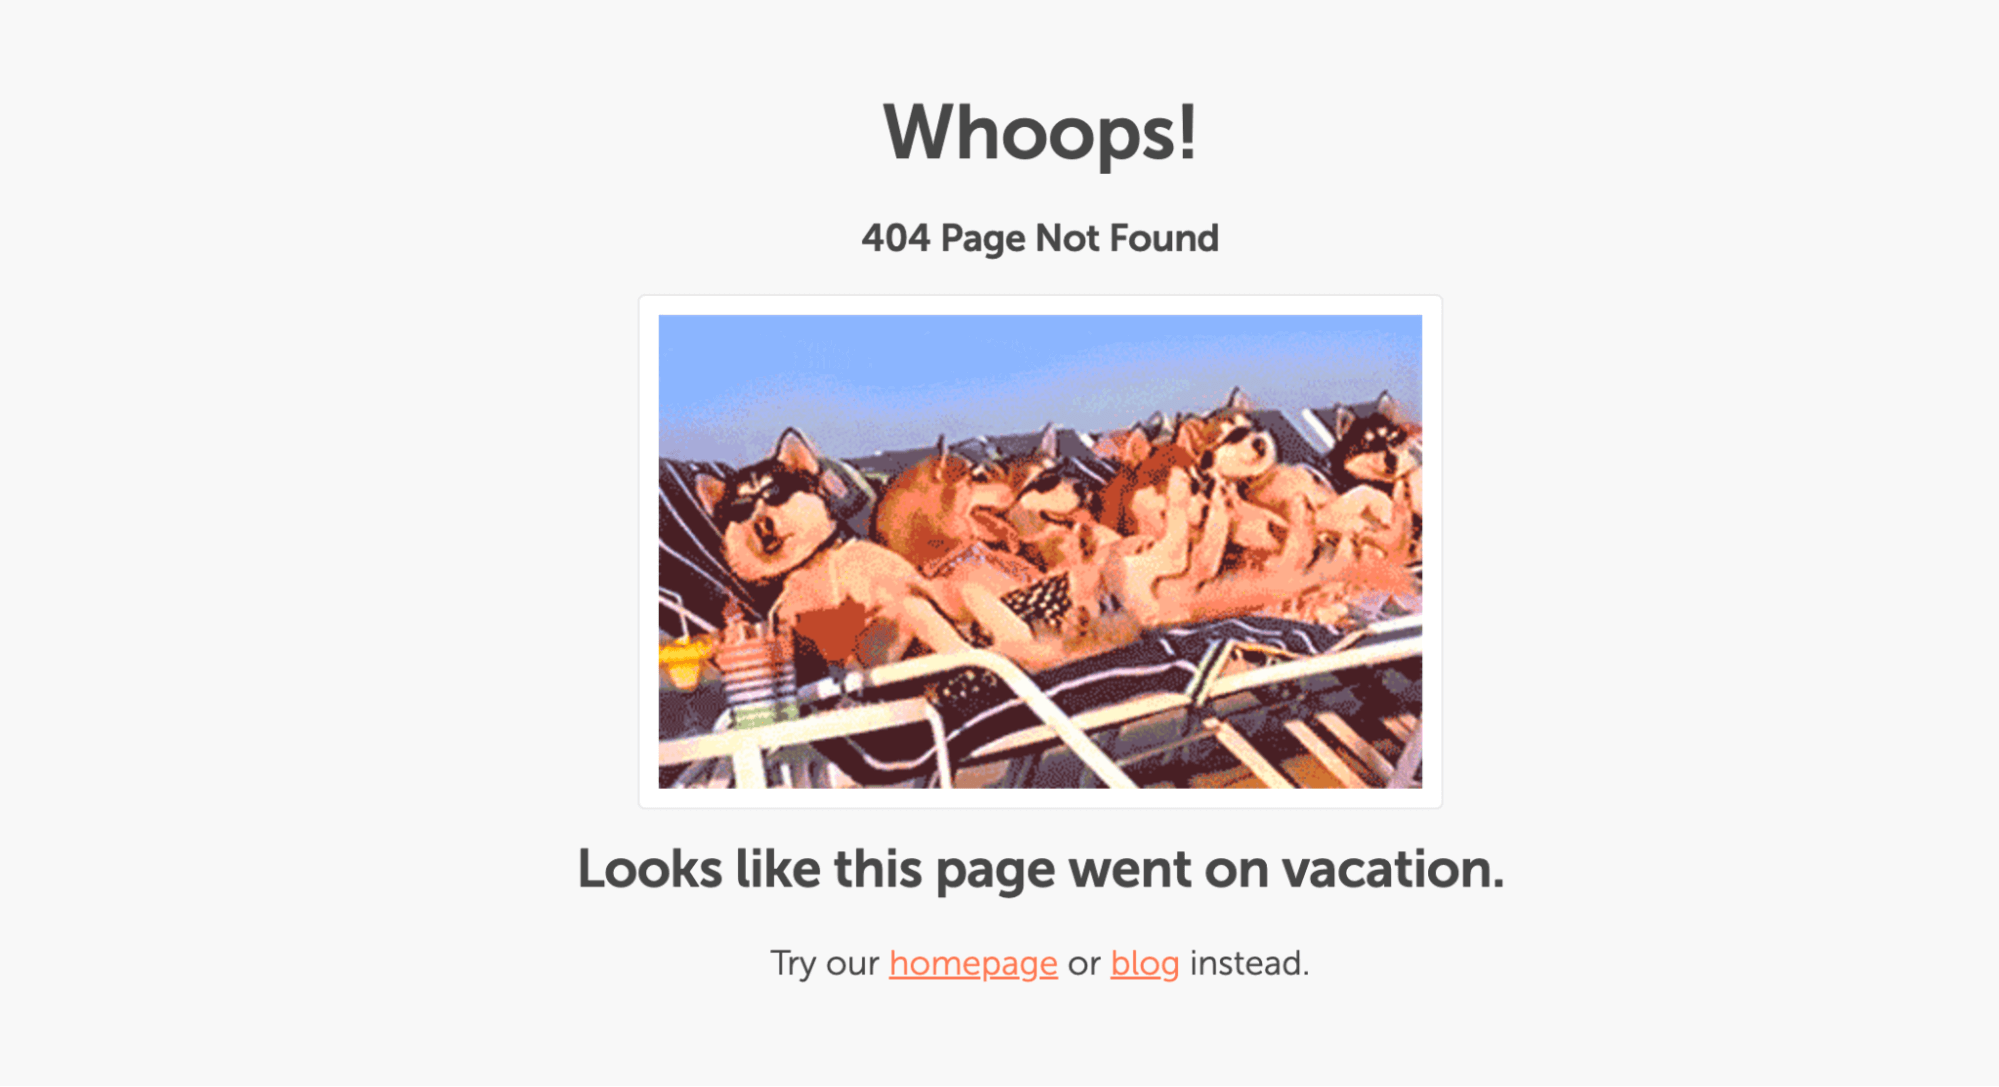 CoSchedule 404 Page